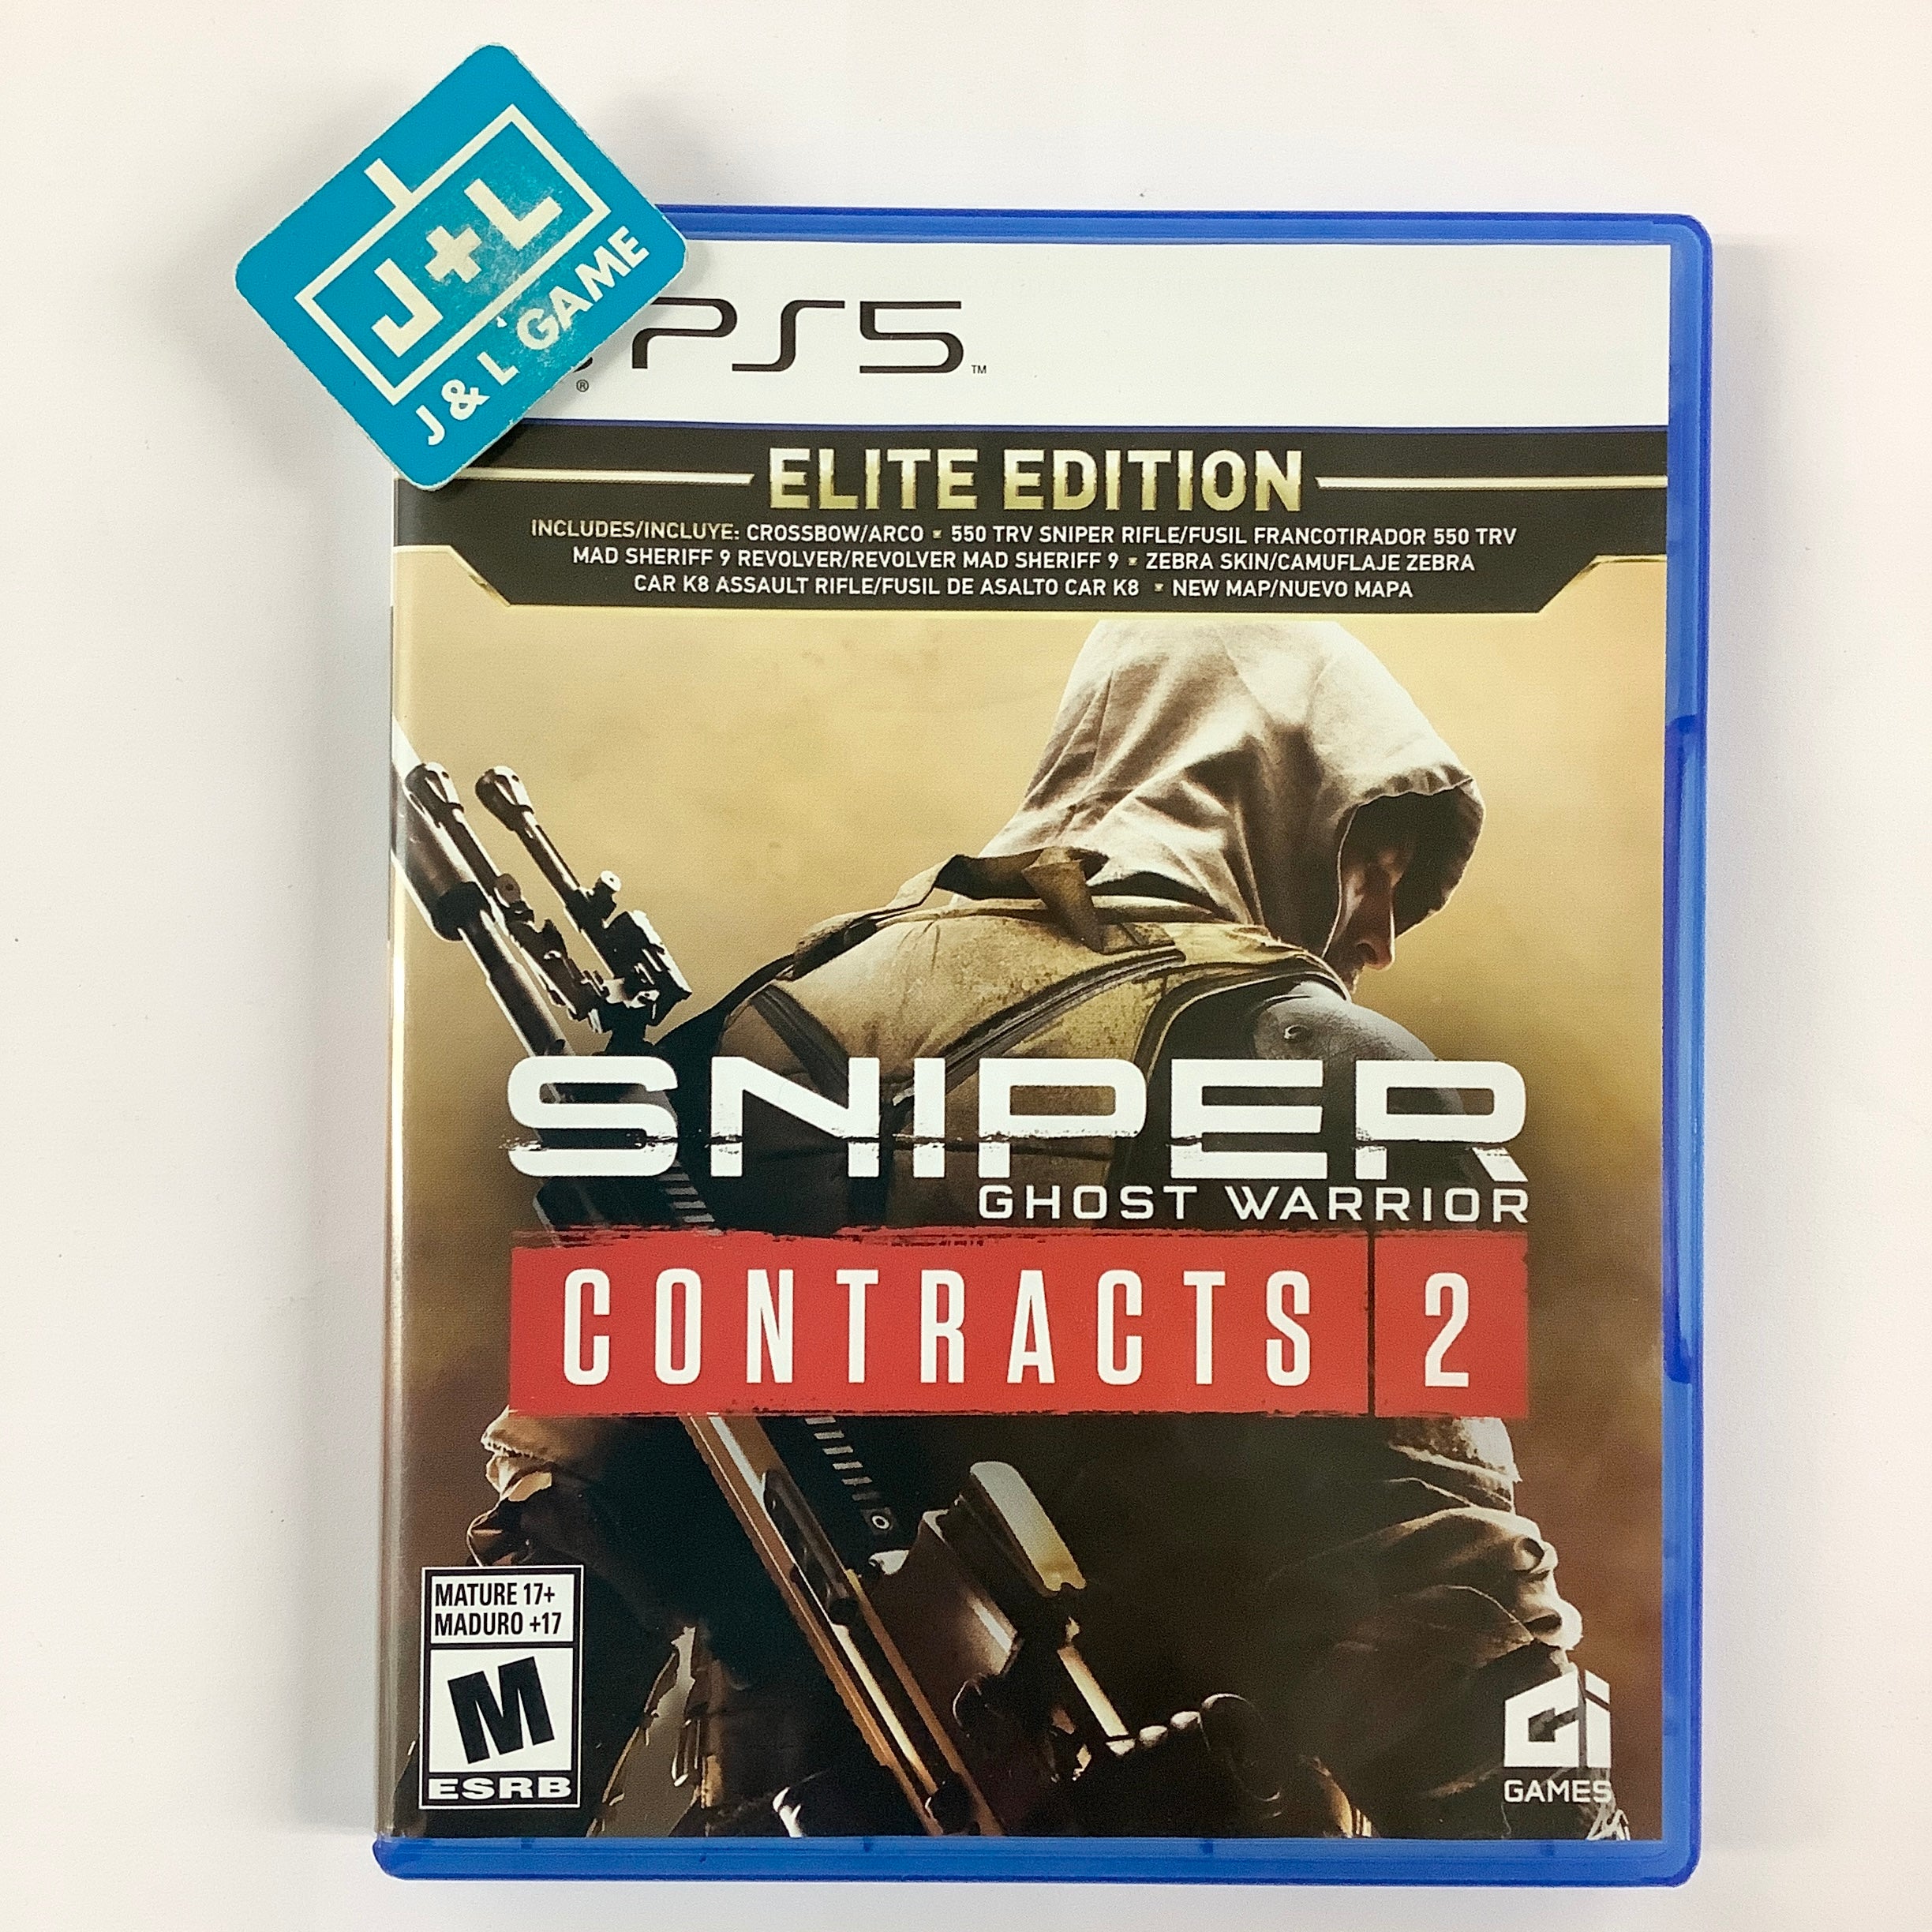 Sniper: Ghost Warrior Contracts 2 (Elite Edition) - (PS5) PlayStation 5 [UNBOXING] Video Games CI Games   